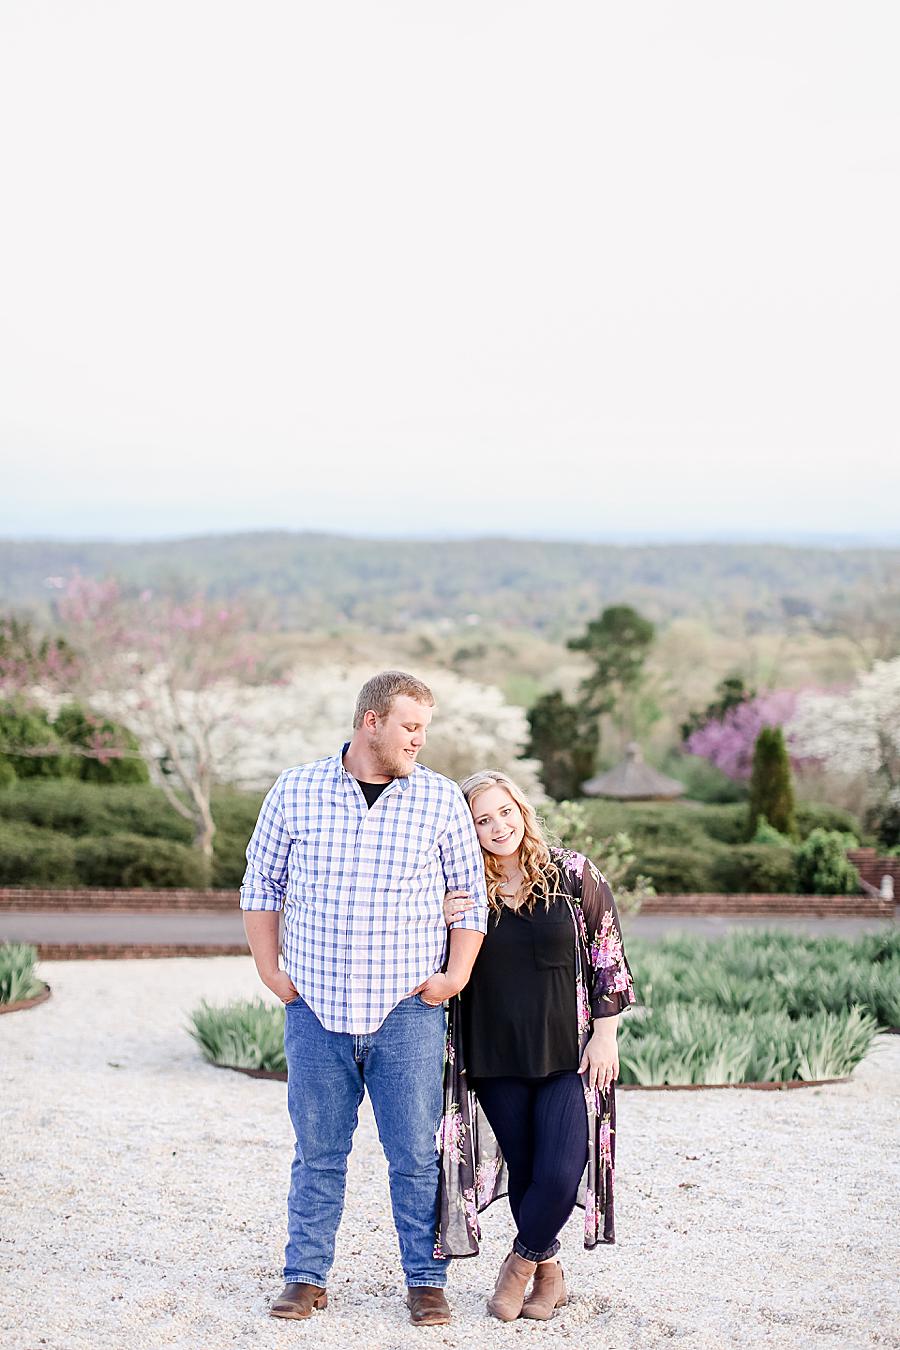 Blue plaid at this Baxter Gardens Engagement by Knoxville Wedding Photographer, Amanda May Photos.